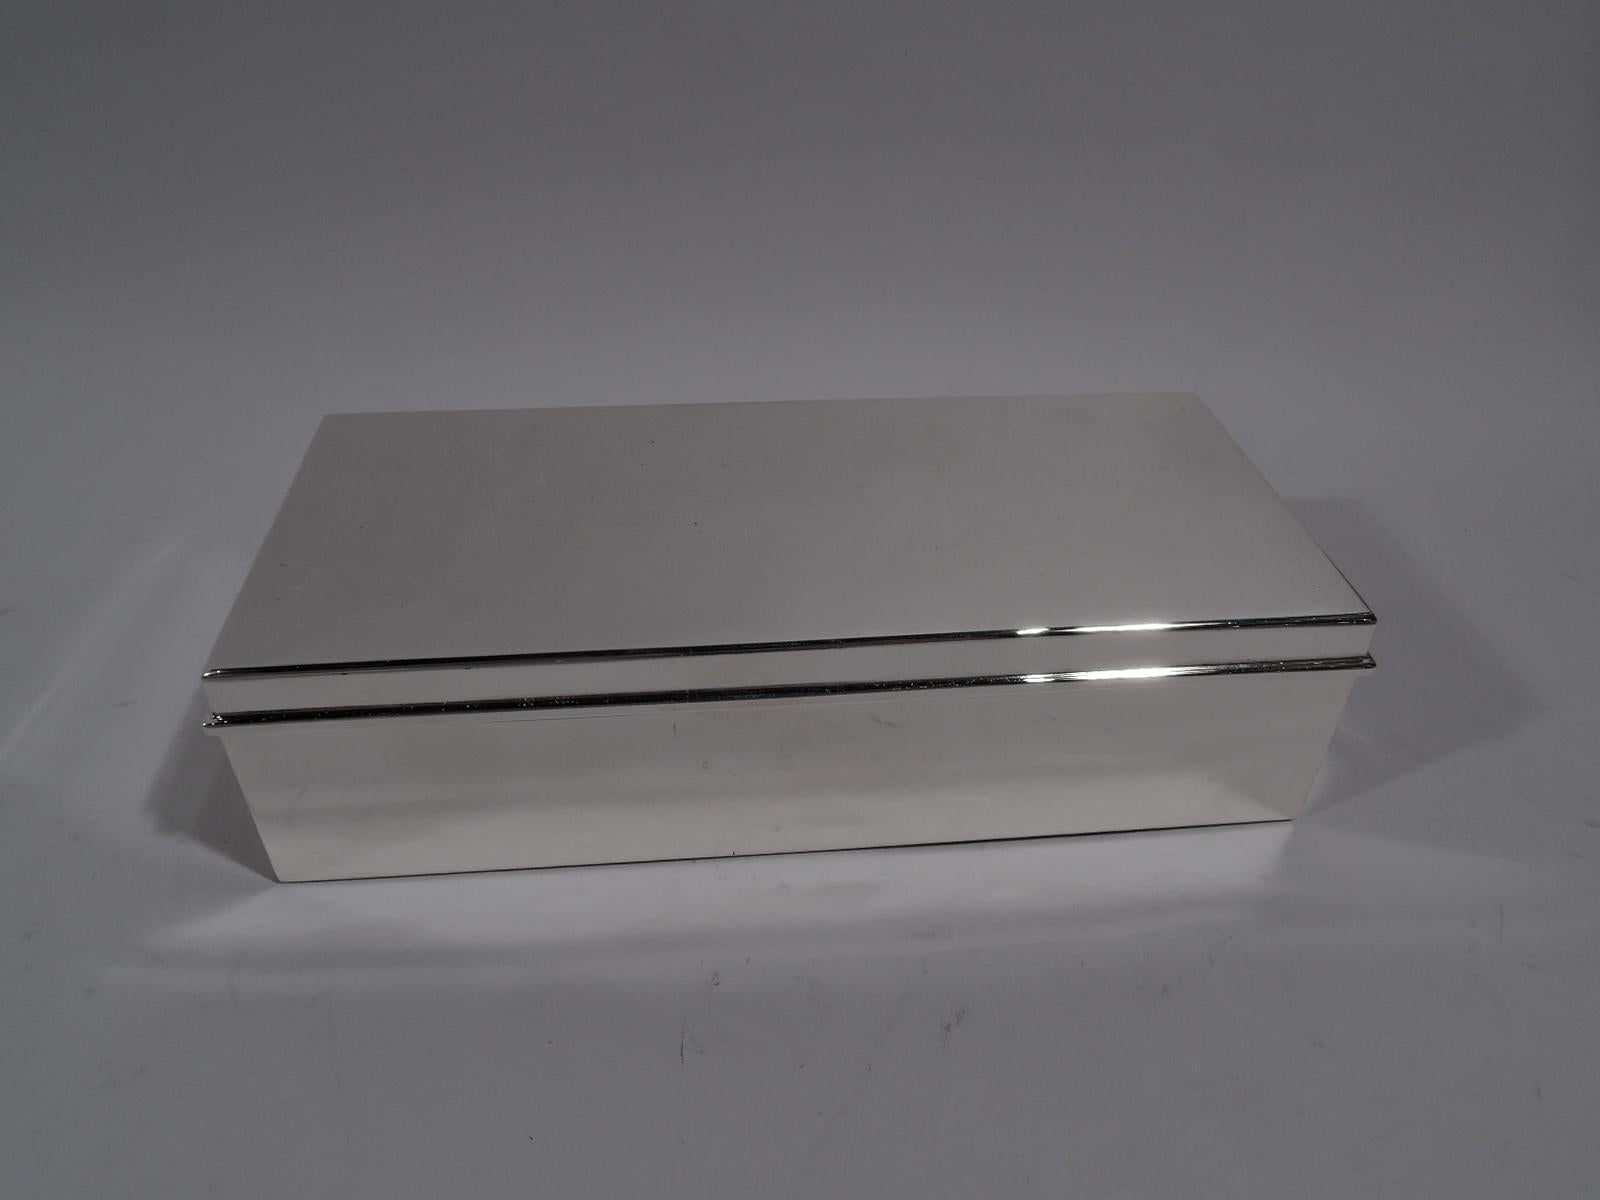 Stylish and modern sterling silver desk box. Made by Tiffany & Co. in New York. Rectangular with straight sides. Cover flat and hinged with molded rim. Box and cover interior cedar-lined and partitioned. Hallmark includes pattern no. 23093 and